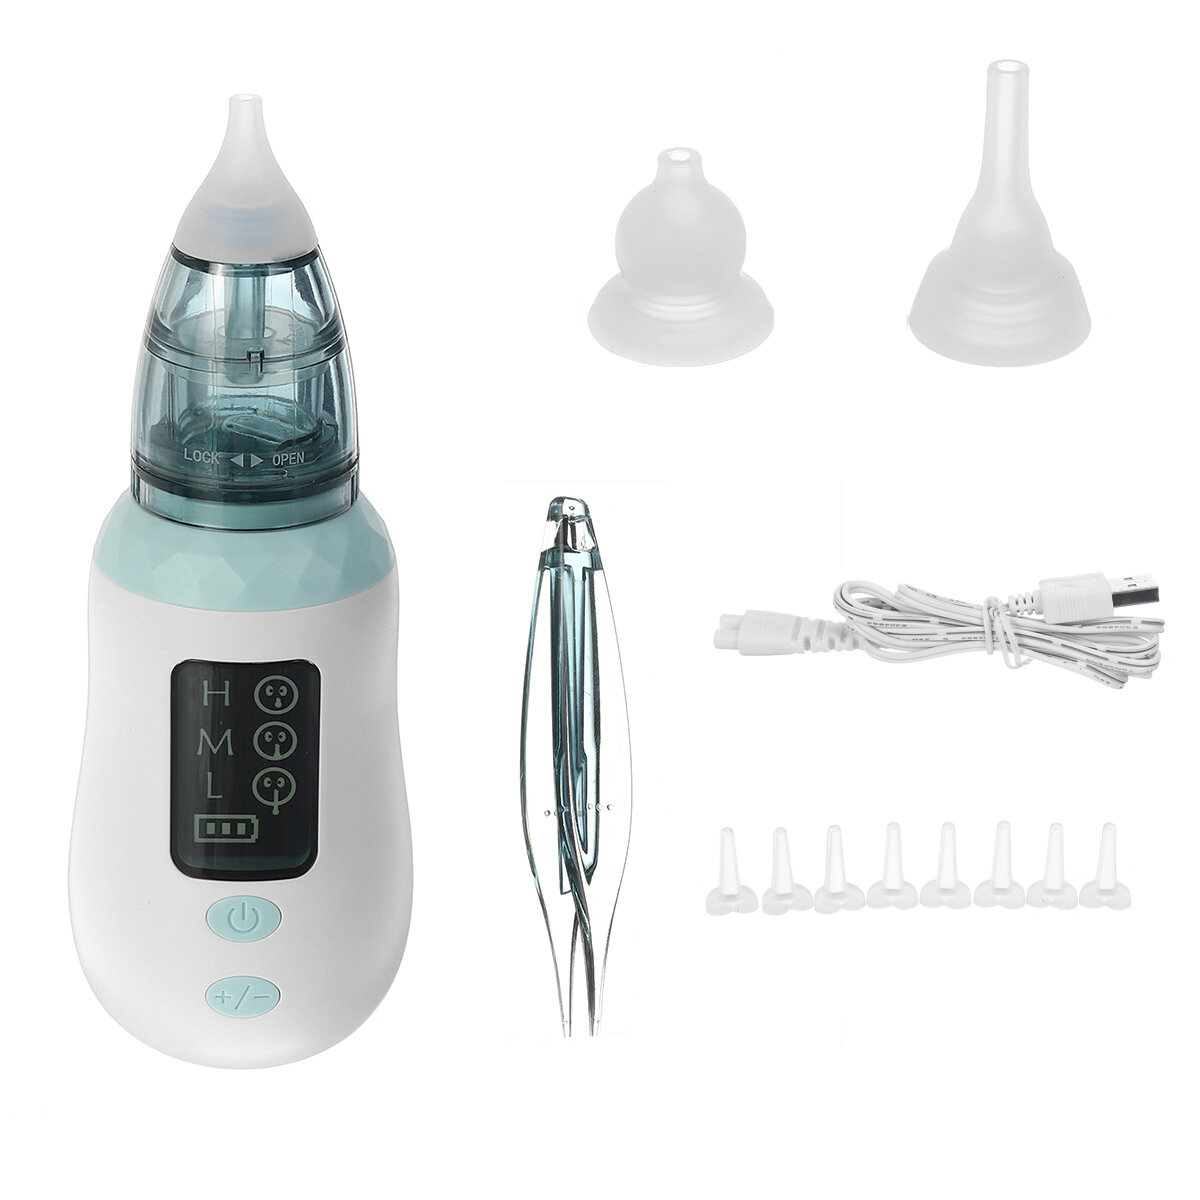 

Electric Baby Nasal Aspirator Nose Cleaner Sniffling Equipment Safe Hygienic Nose Snot Cleaner For Newborns Boy Girls